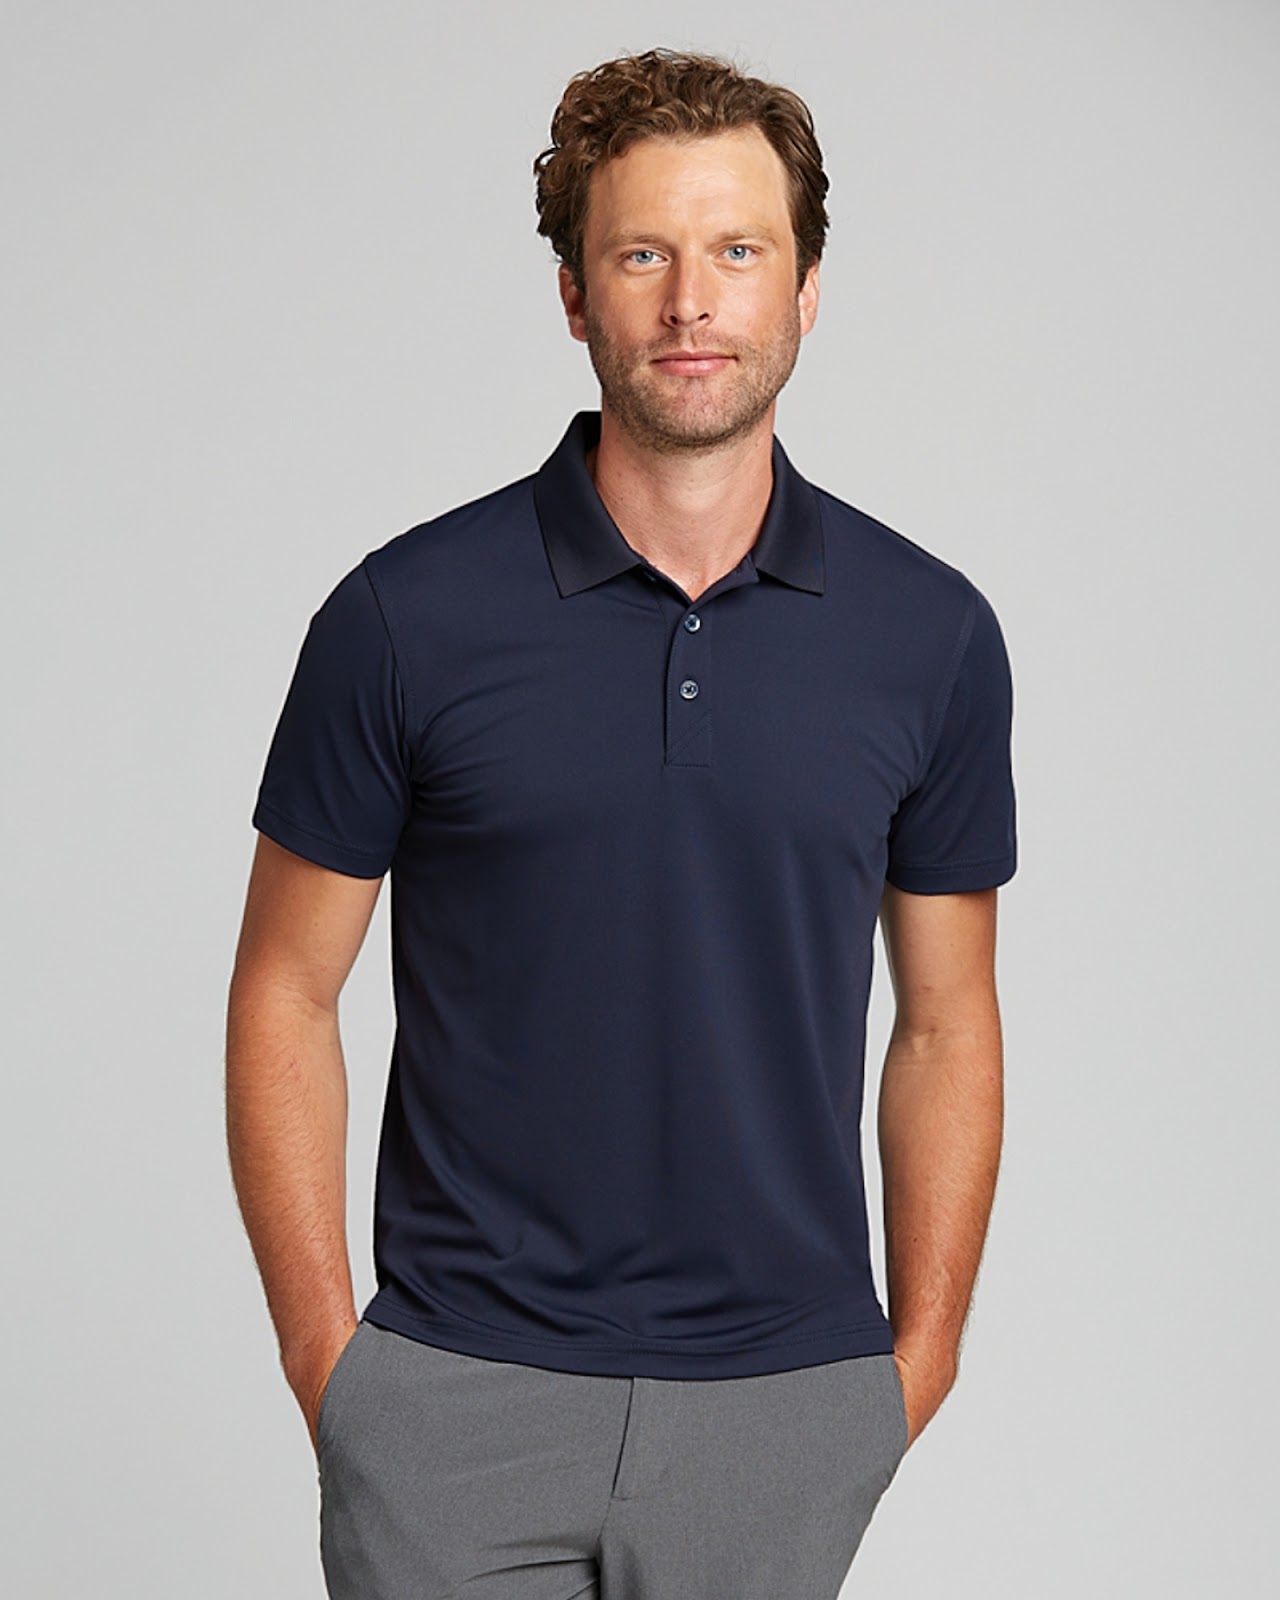 Men's Cutter & Buck Forge Polo Tailored Fit Style